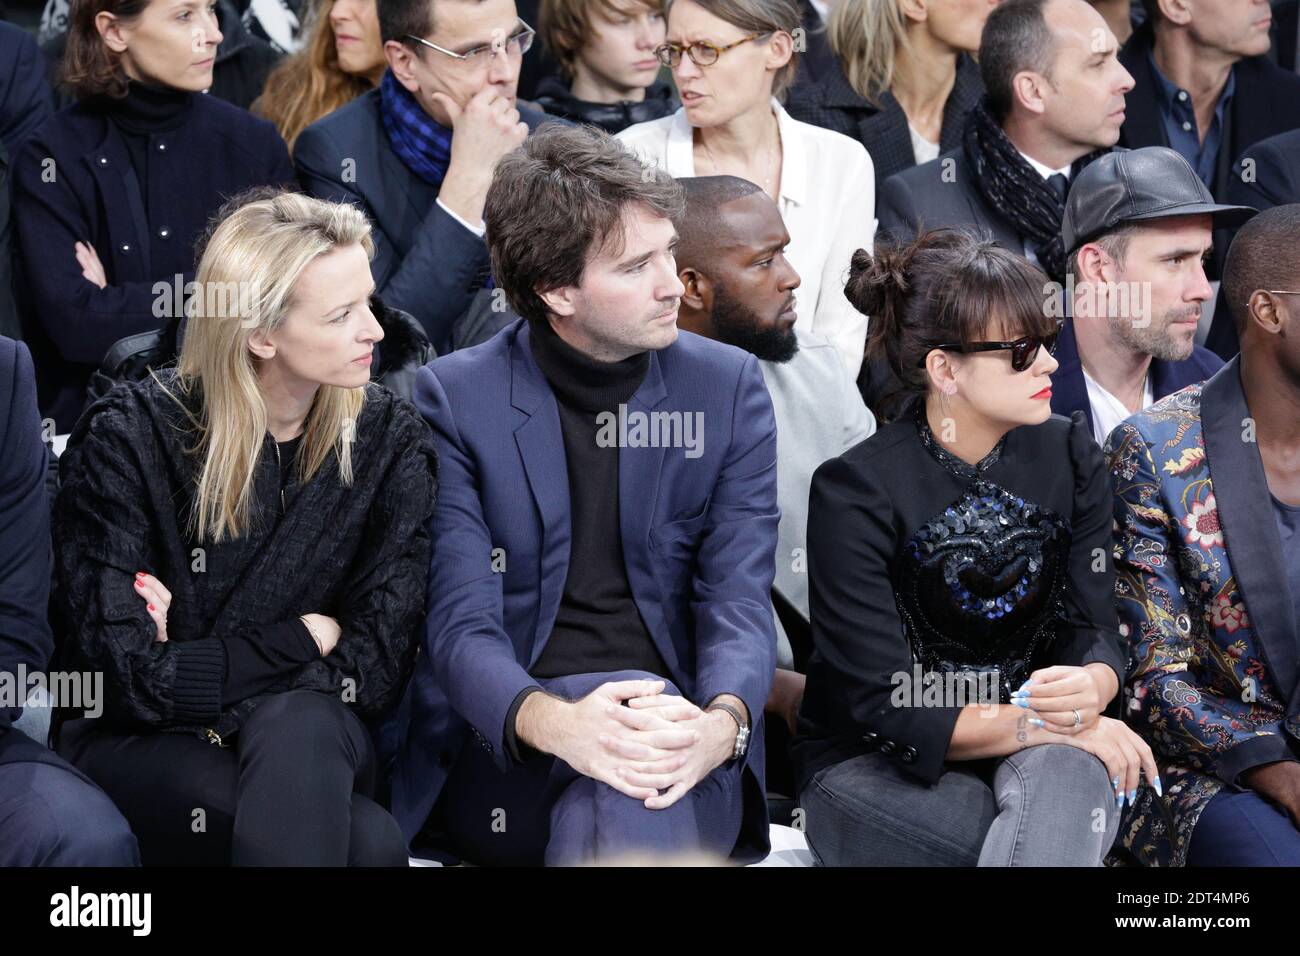 Delphine Arnault attending the Louis Vuitton Womenswear Spring/Summer 2021  show as part of Paris Fashion Week in Paris, France on October 6, 2020.  Photo by Denis Guignebourg/ABACAPRESS.COM Stock Photo - Alamy